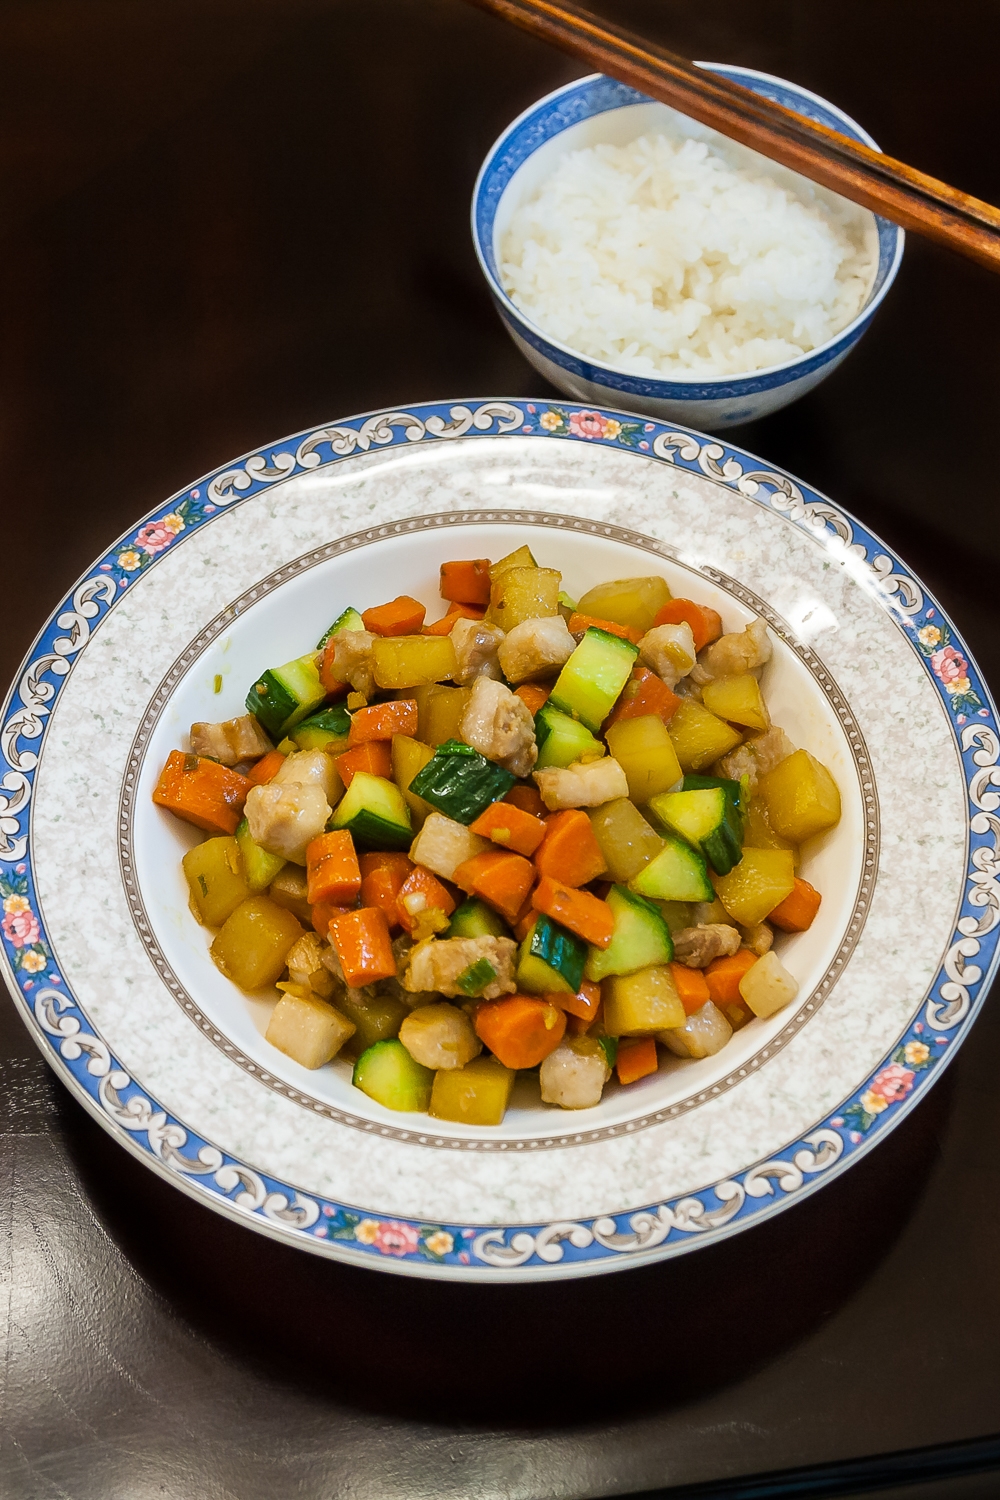 Stir Fried Diced Meat and Three Vegetables - Completed Dish